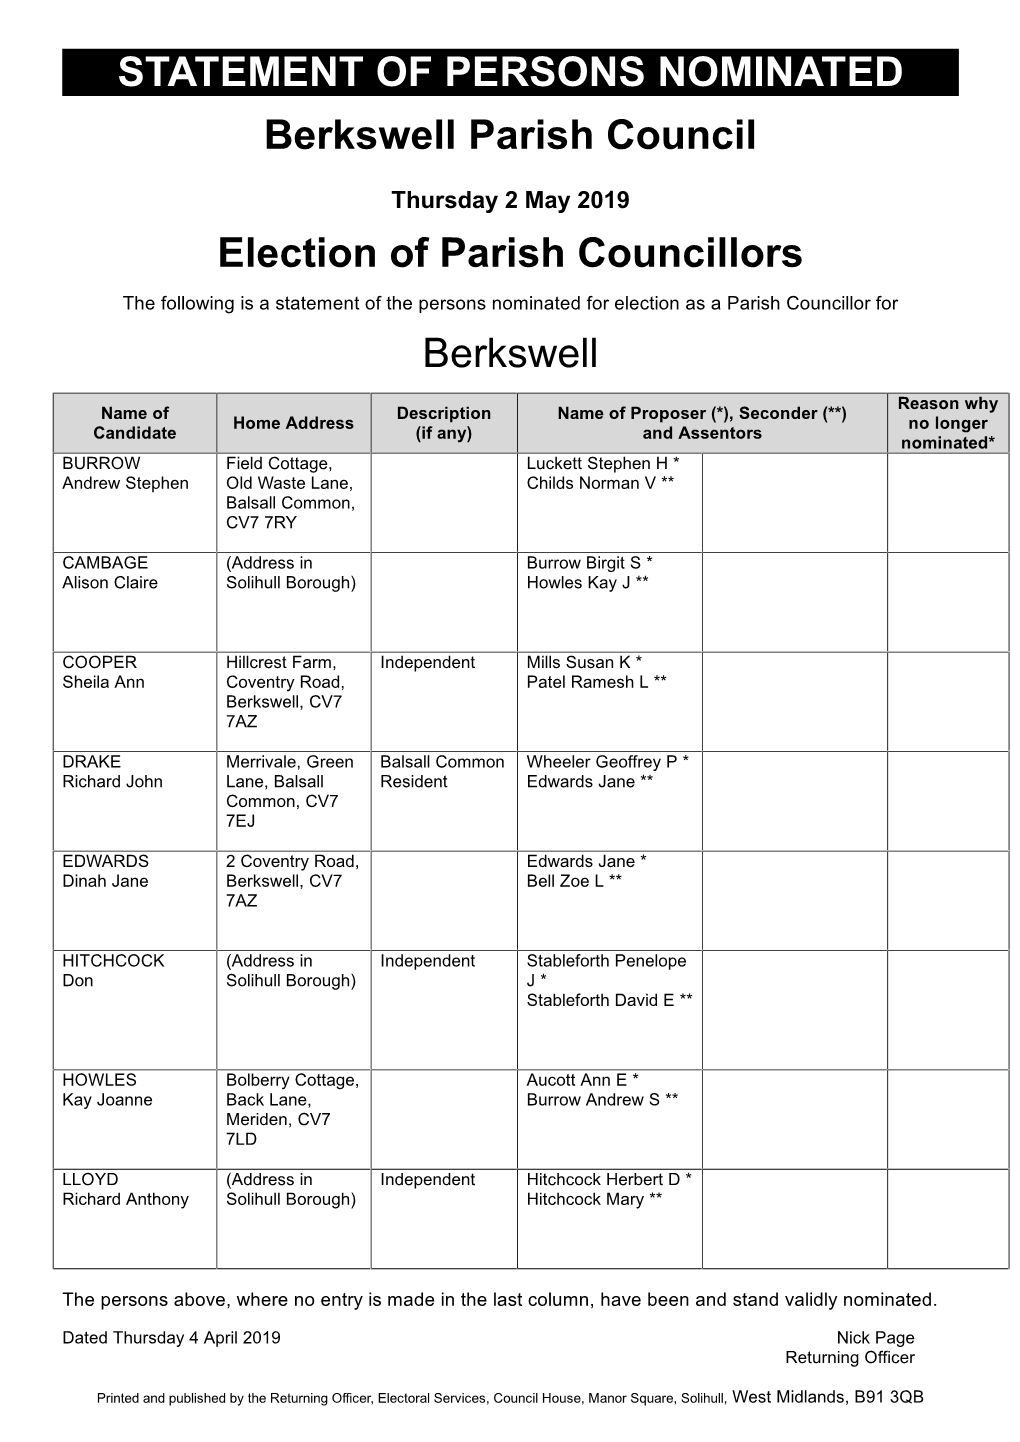 STATEMENT of PERSONS NOMINATED Berkswell Parish Council